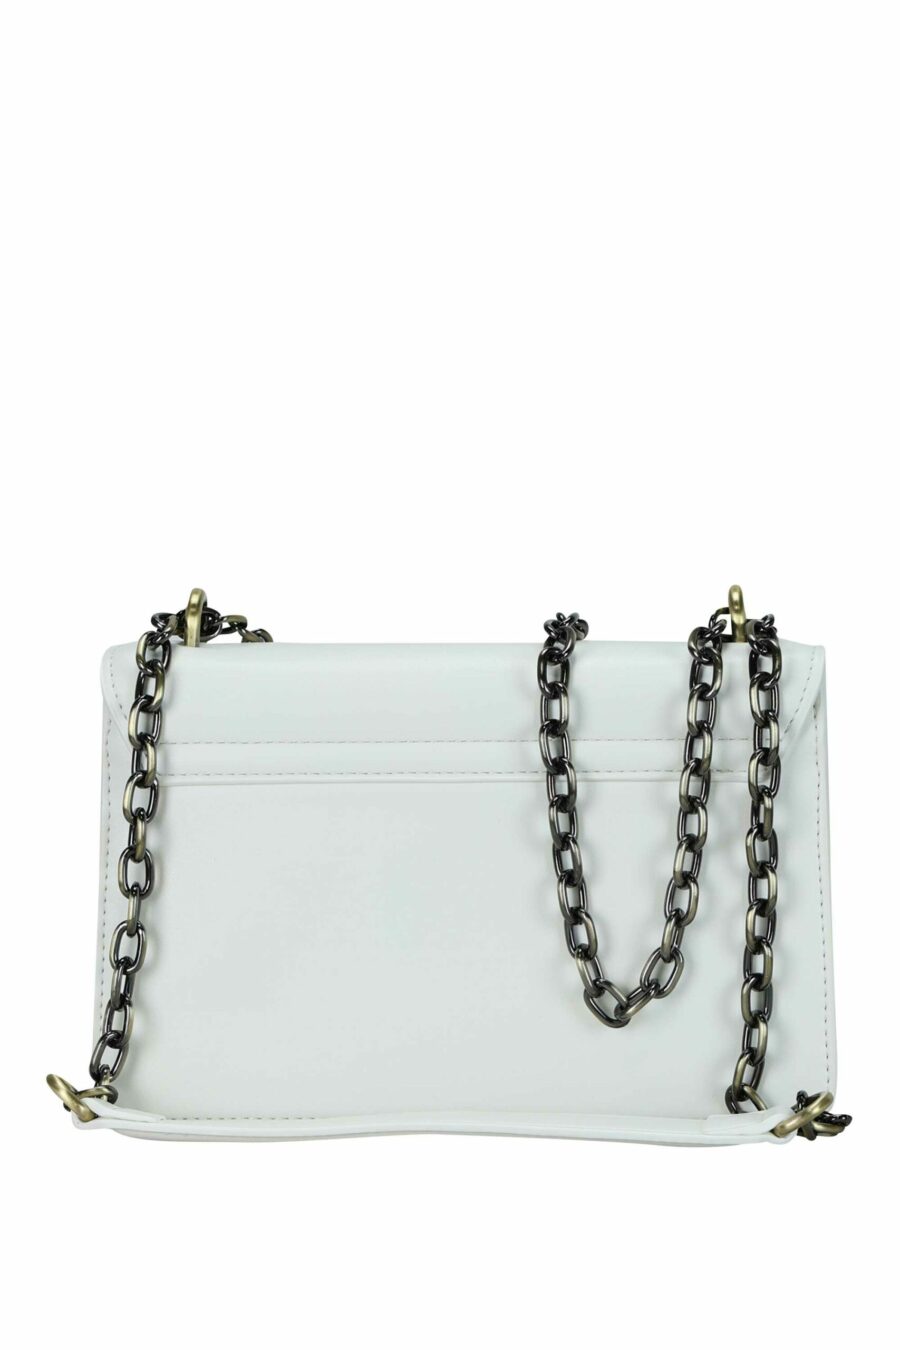 White square shoulder bag with chain and golden circular "c" logo - 8052672735584 2 scaled